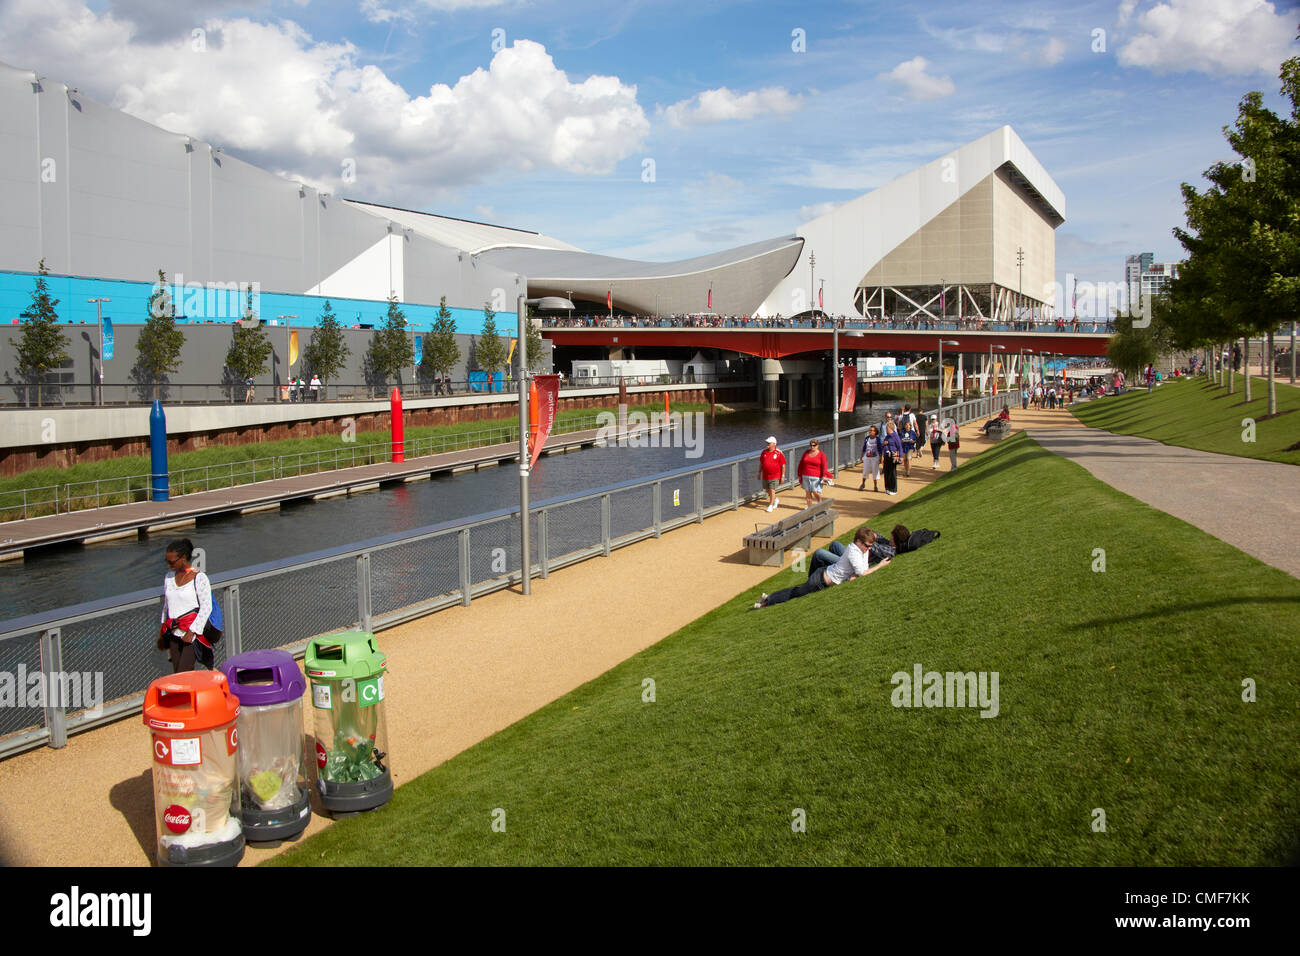 Aquatics Centre and River Lea with people on a sunny day at Olympic Park, London 2012 Olympic Games site, Stratford London E20 UK, Stock Photo